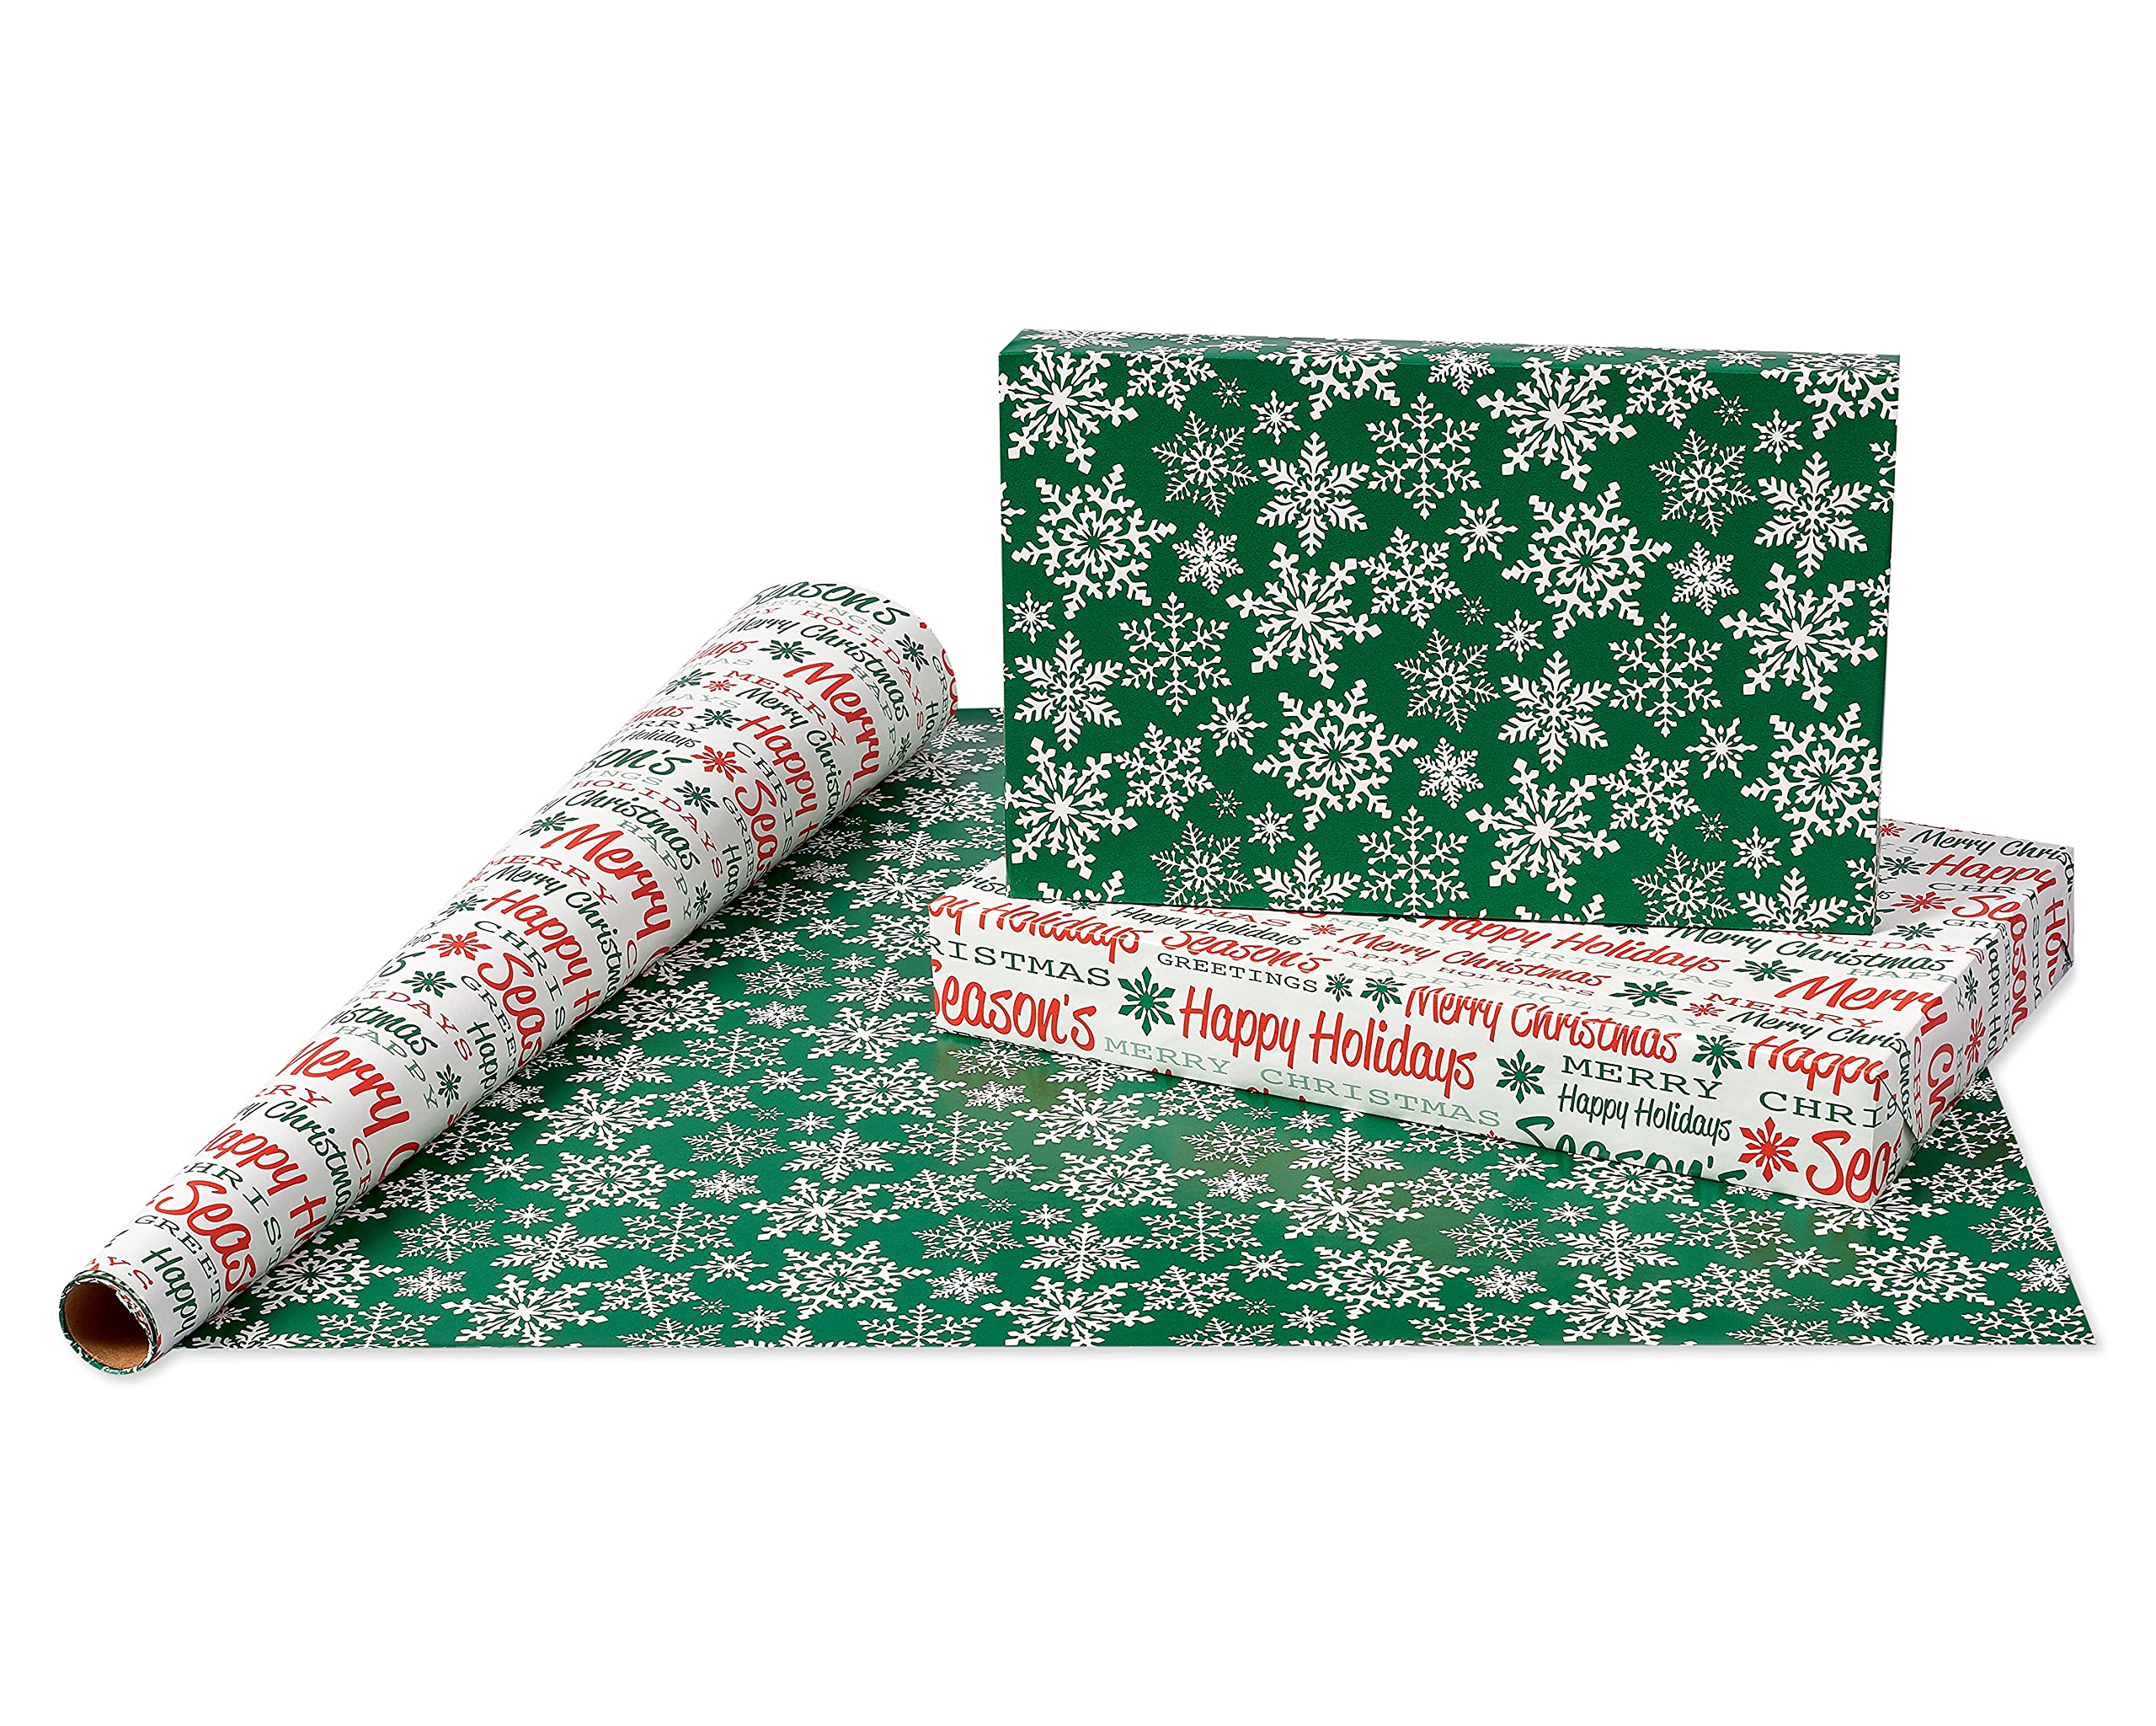 American Greetings 160 sq. ft. Reversible Christmas Wrapping Paper Set, Vintage Designs (4 Rolls 30 in. x 16 ft., 7 Bows, 30 Gift Tags)